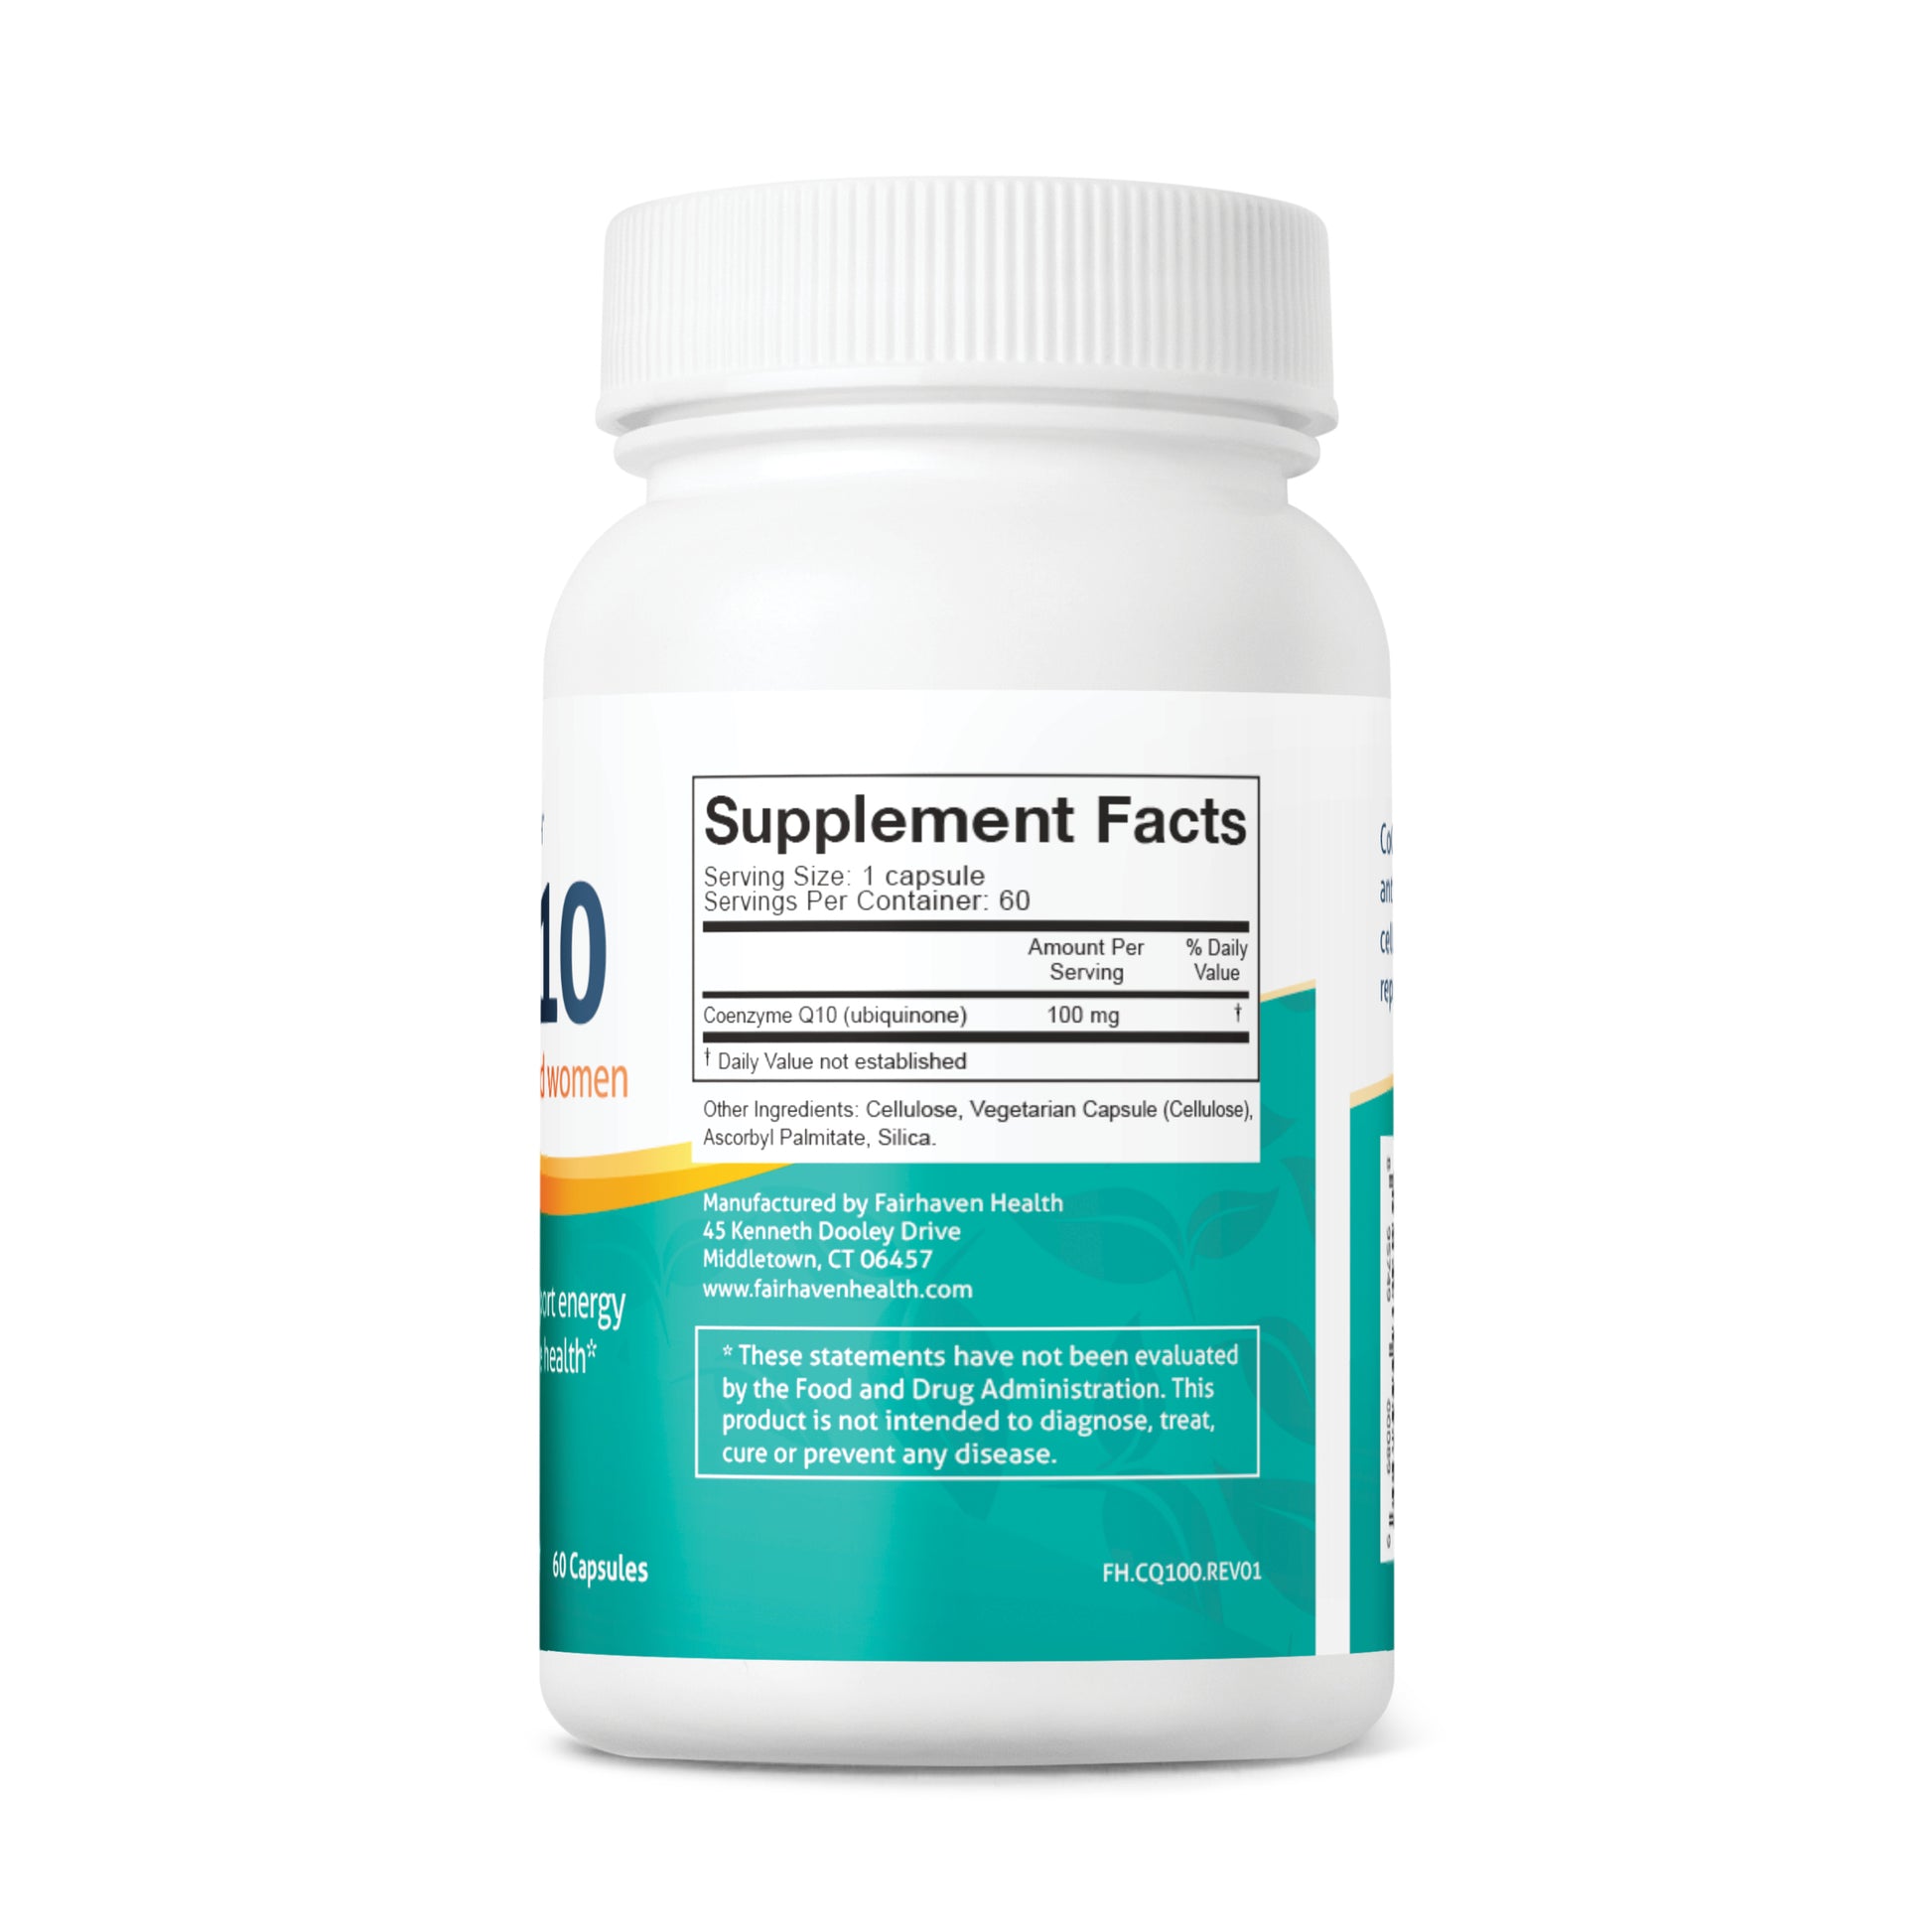 Fairhaven Health CoQ10 for men and women's reproductive health supplement facts.